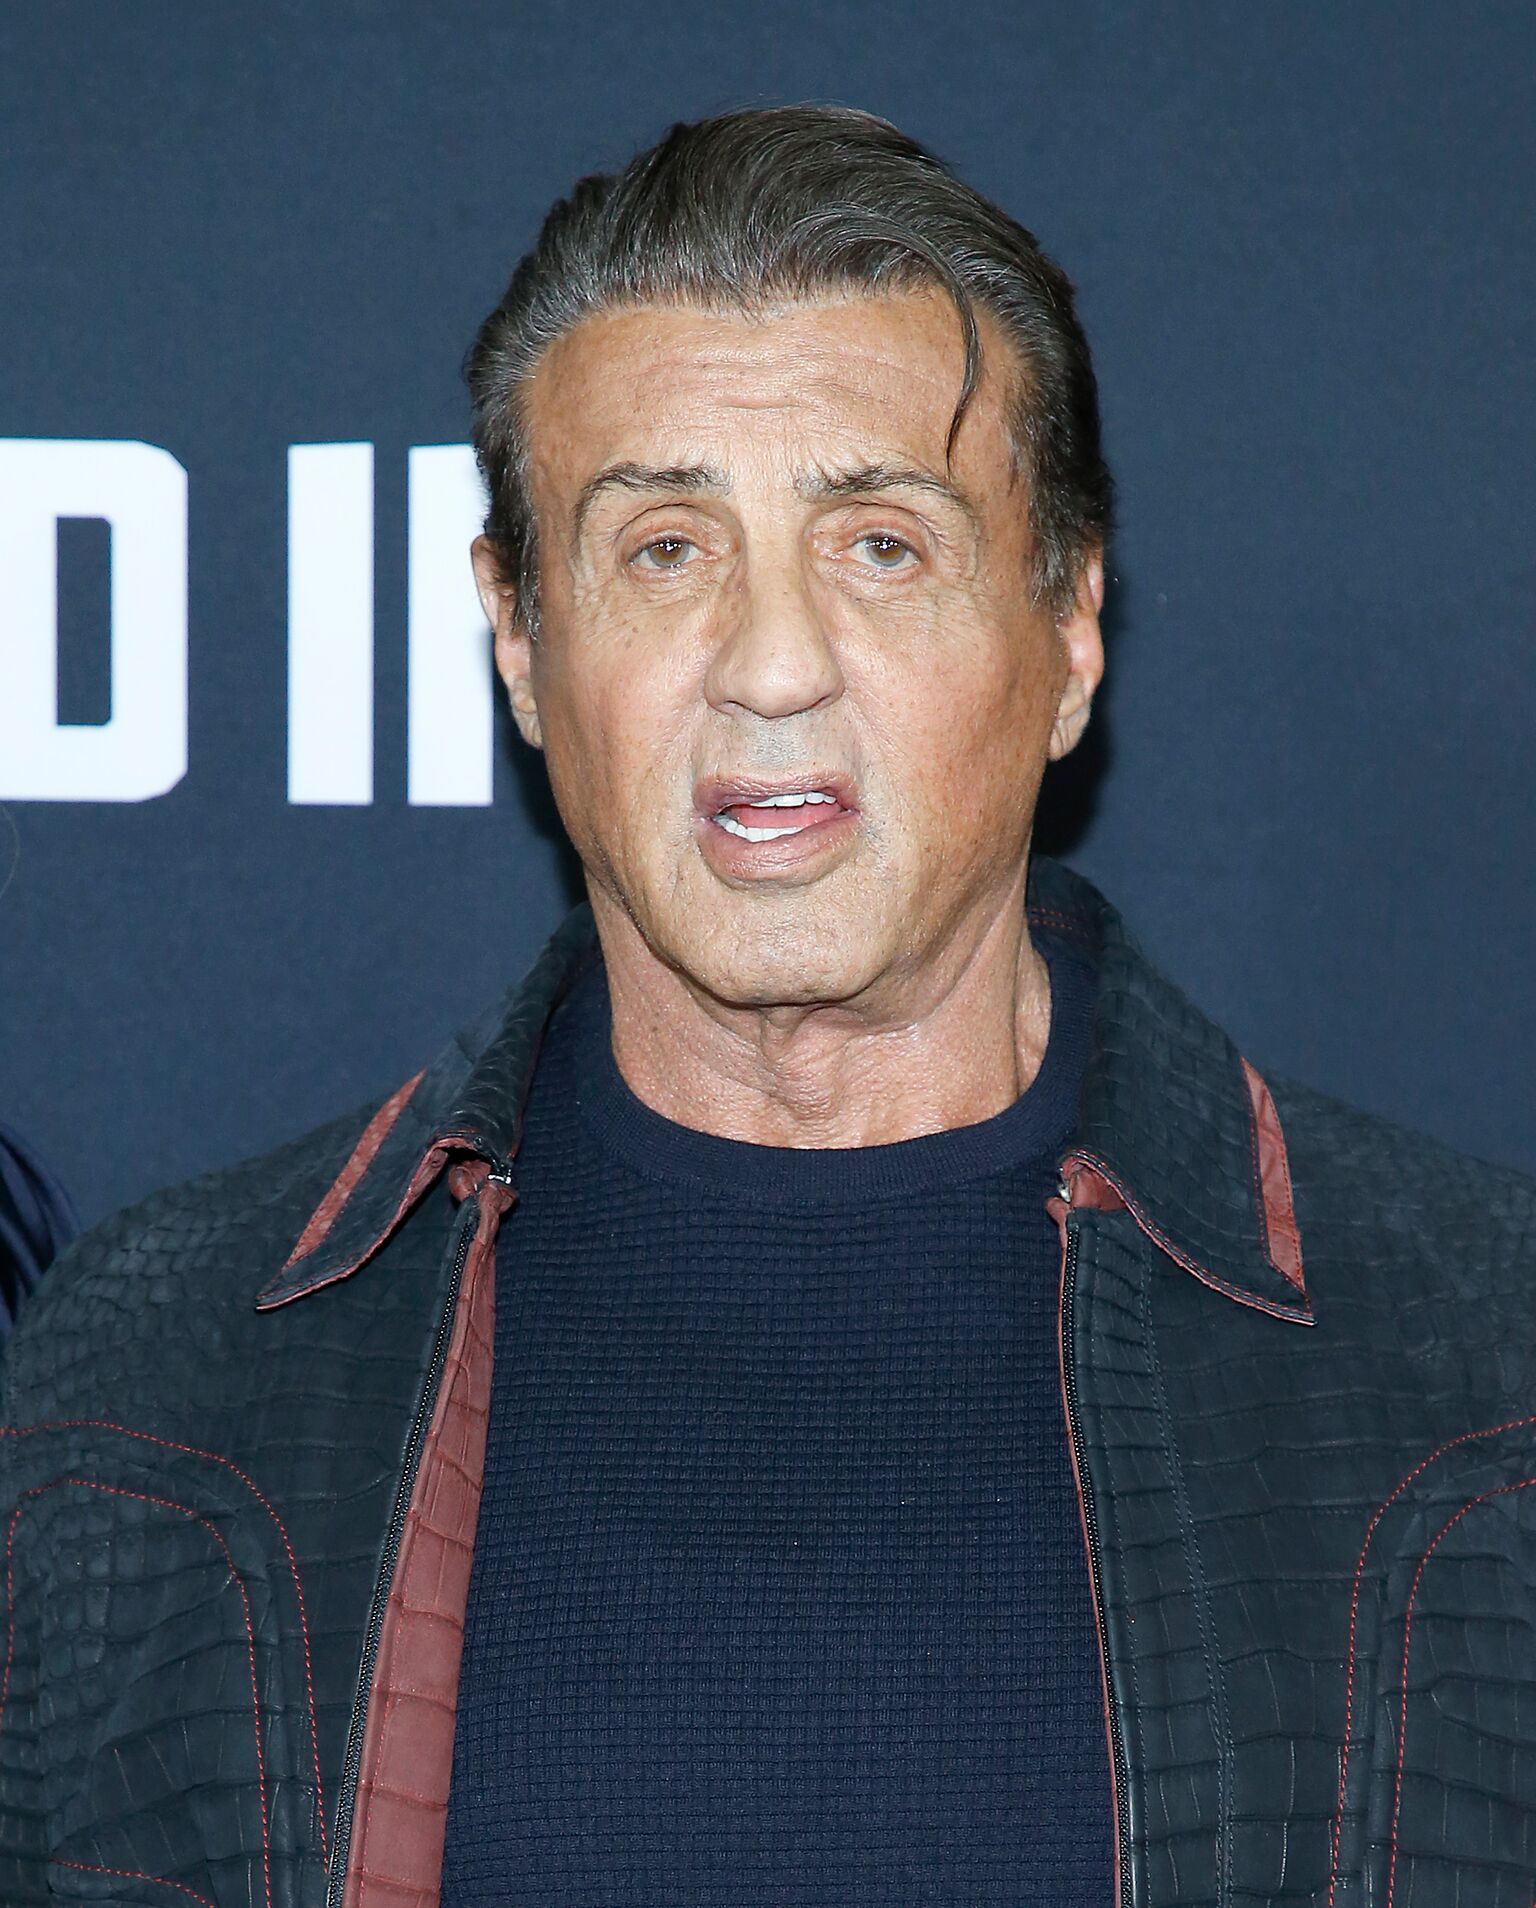 Sylvester Stallone at screening of "Creed II"  | Getty Images